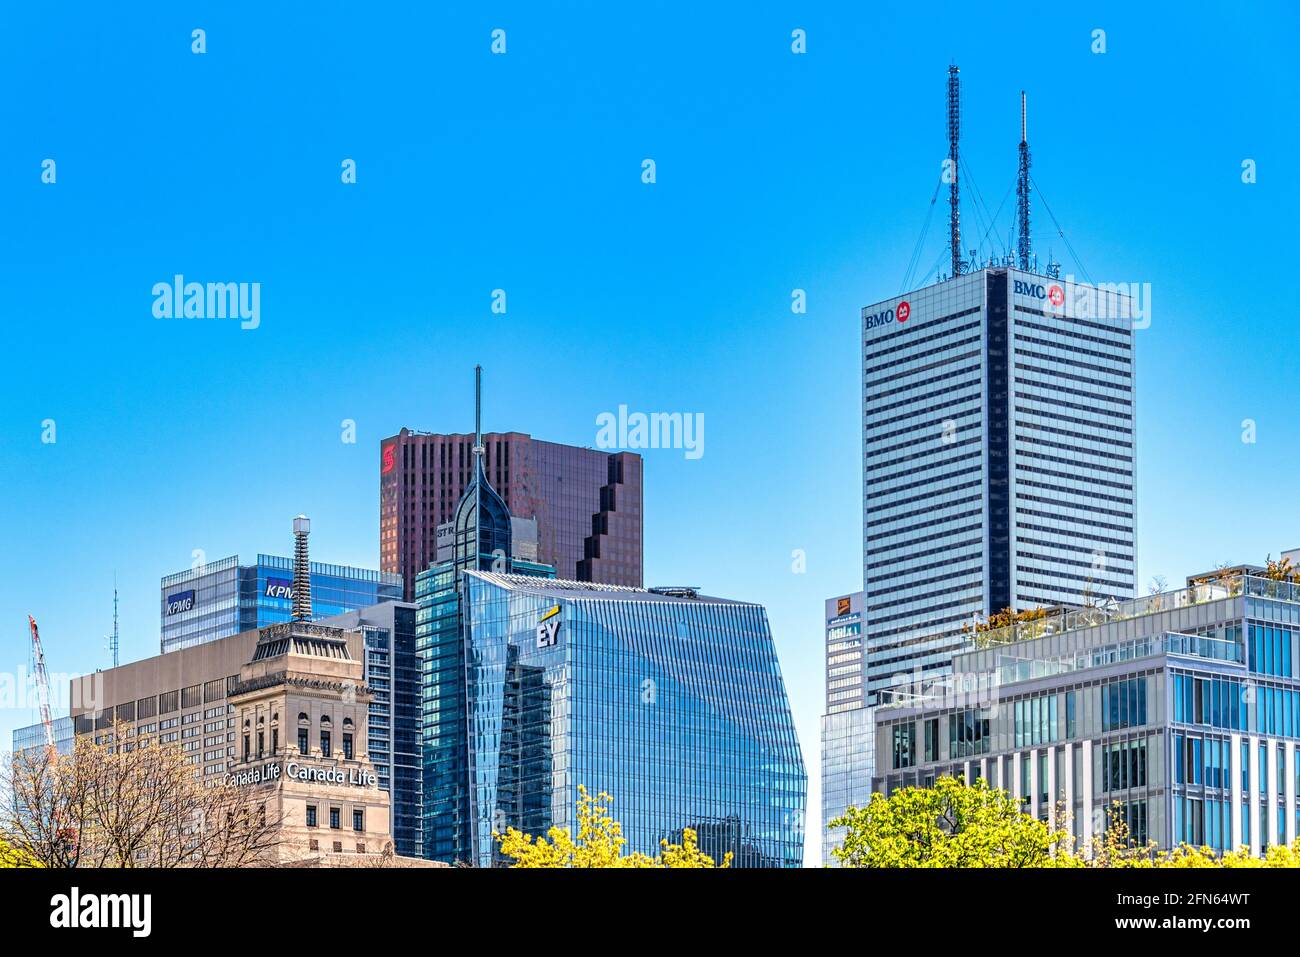 Zoom to the skyscrapers in the downtown district in Toronto, Canada. Logos of BMO, Scotiabank, KPMG, and EY are seen on top of the buildings Stock Photo